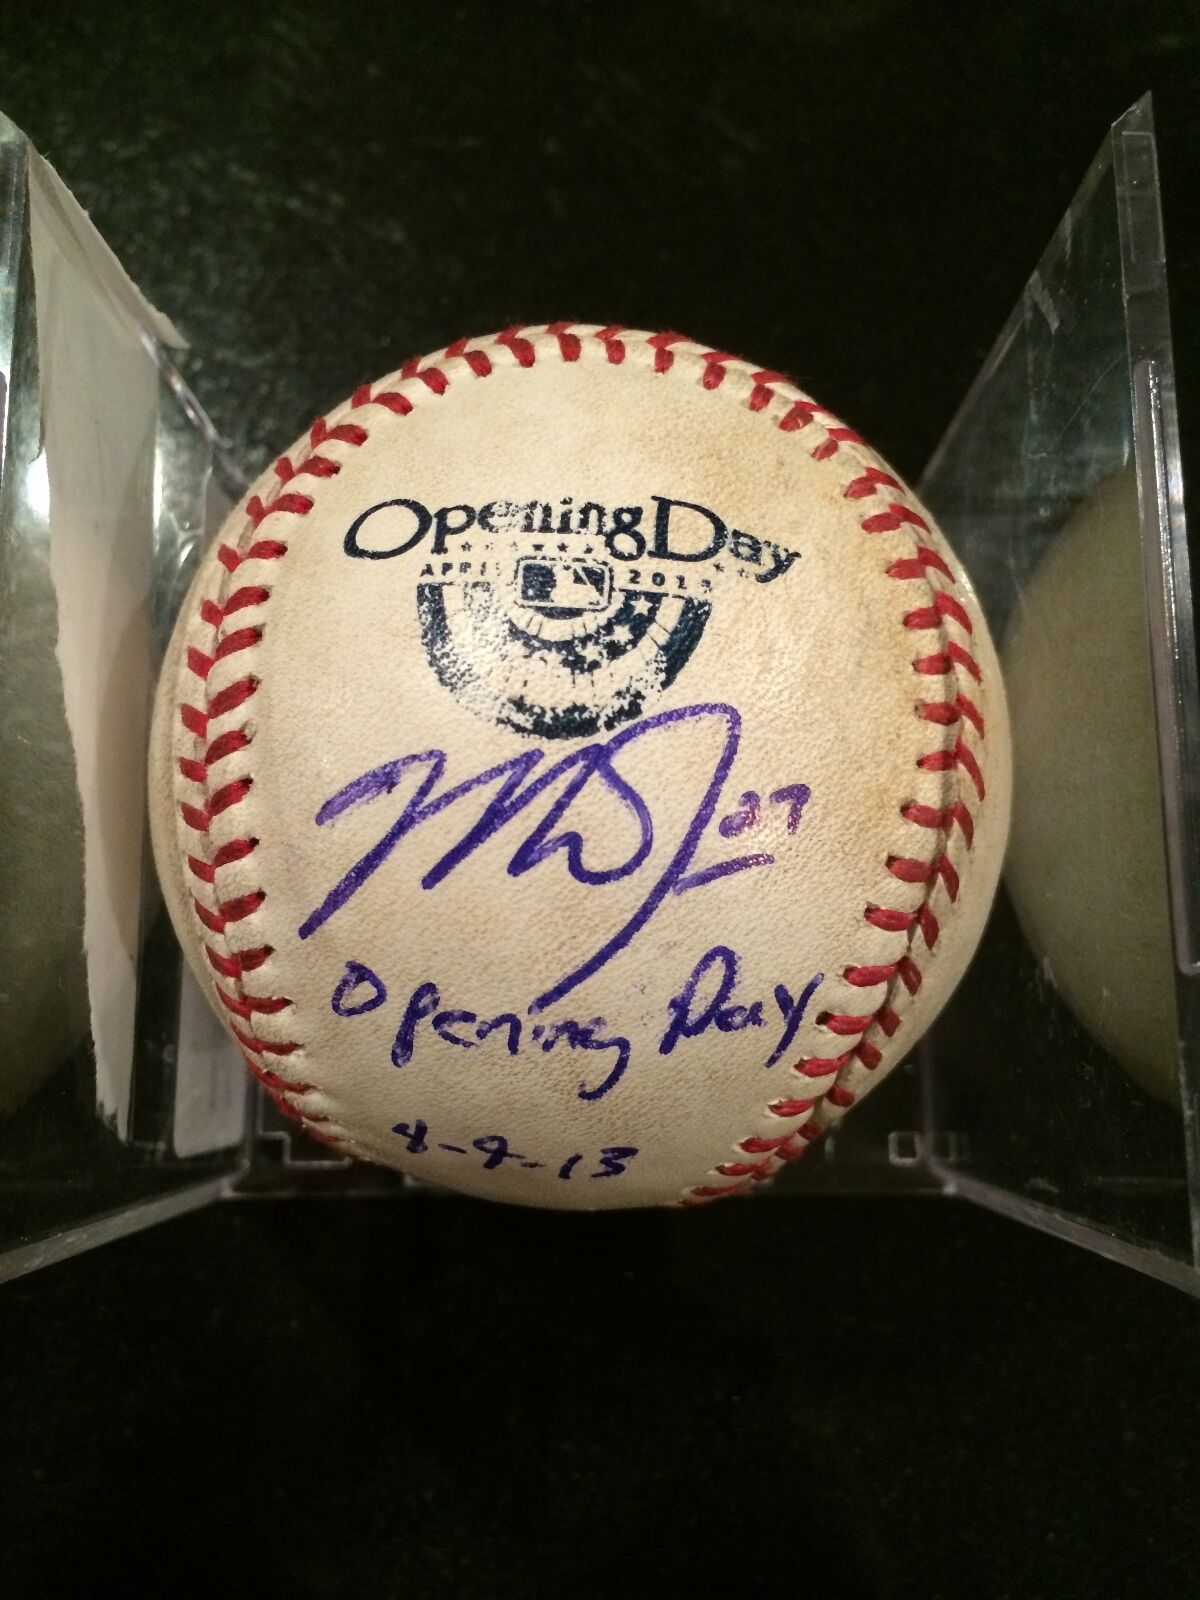 MIKE TROUT 1ST HIT 1ST Home OPENIng DAY -SIGNED & INSCRIBED -MLB AUTHENTICATED